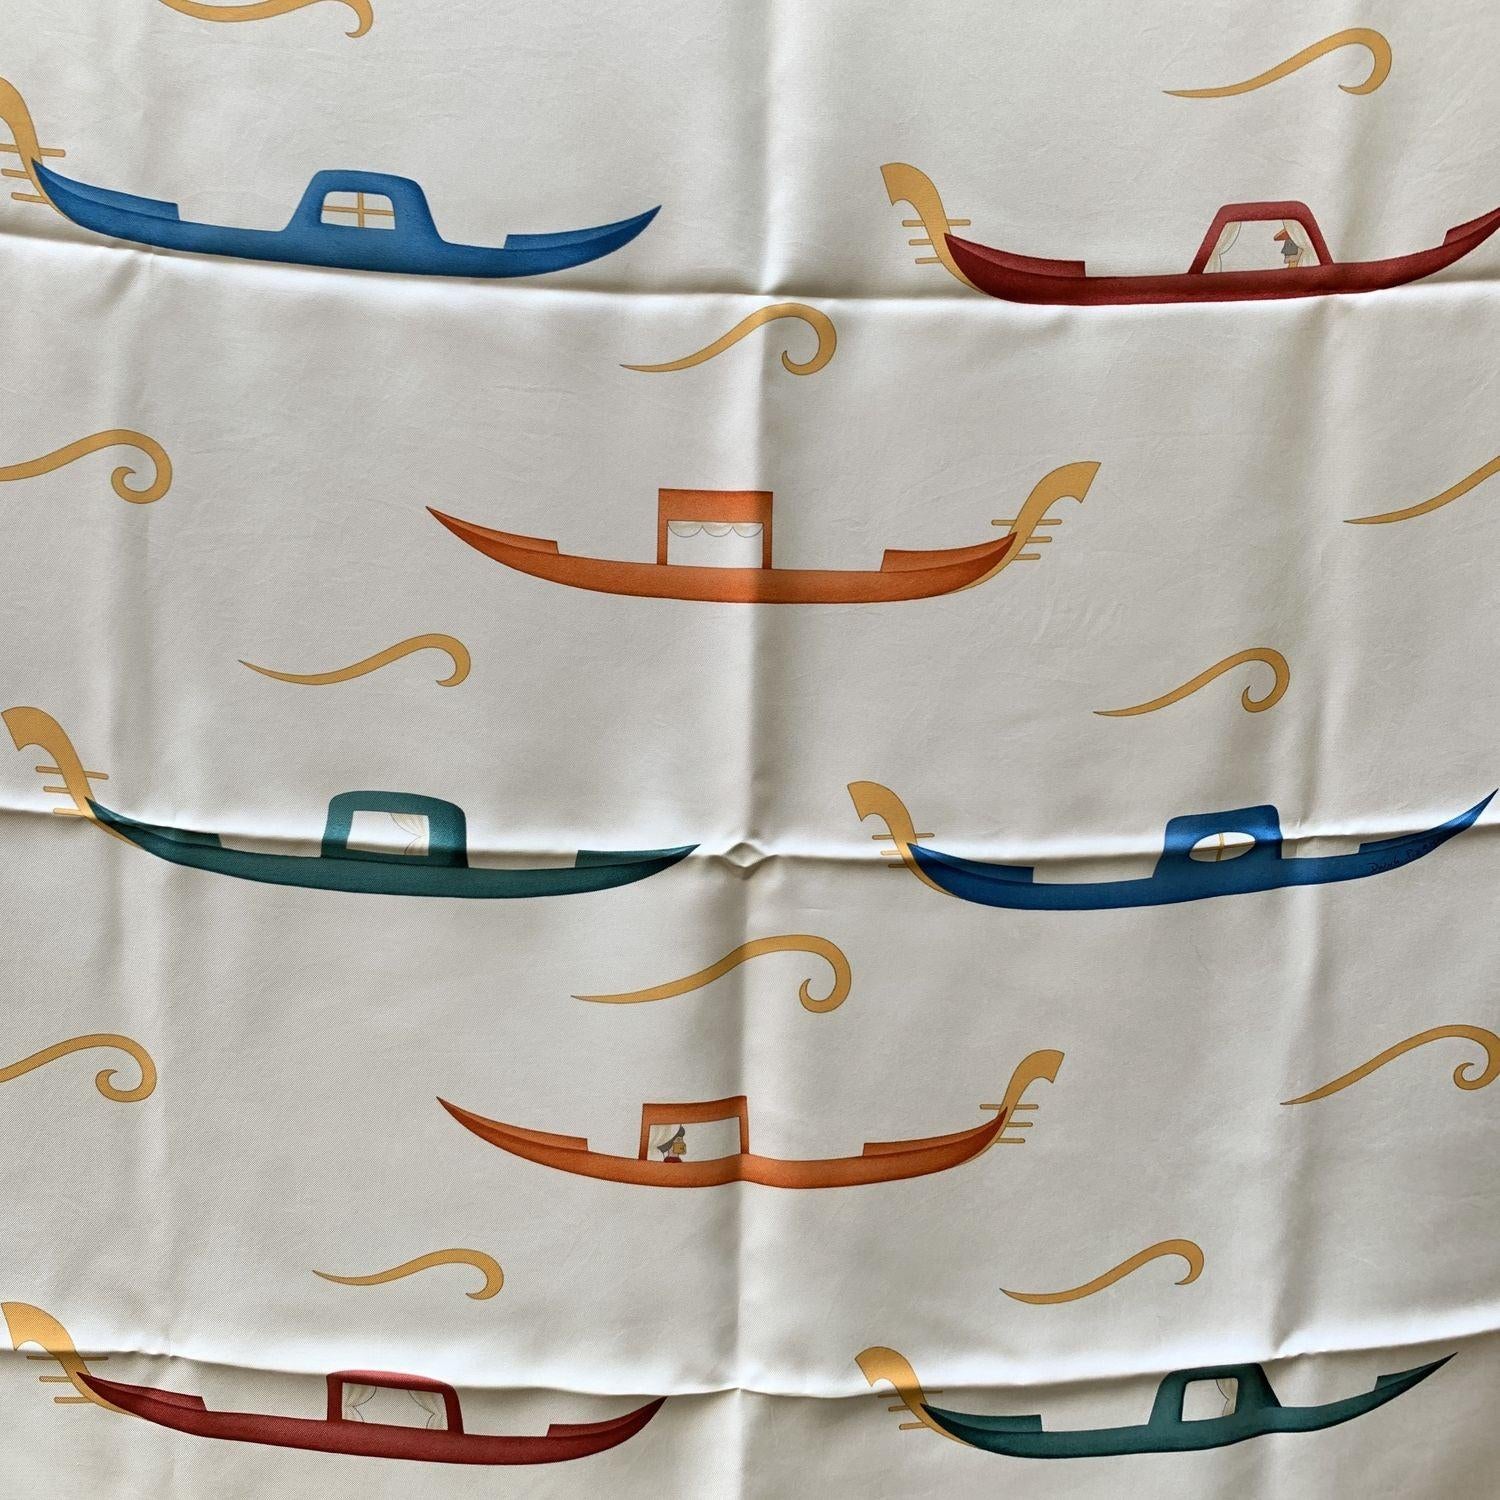 Beautiful vintage Bulgari silk scarf, titled 'Gondola' design. Black, yellow, white colors. 100% Silk. Approx. Measurements: 34 x 34 inches - 86,3 x 86,3 cm. Bulgari composition and care tag is still attached

Details

MATERIAL: Silk

COLOR: